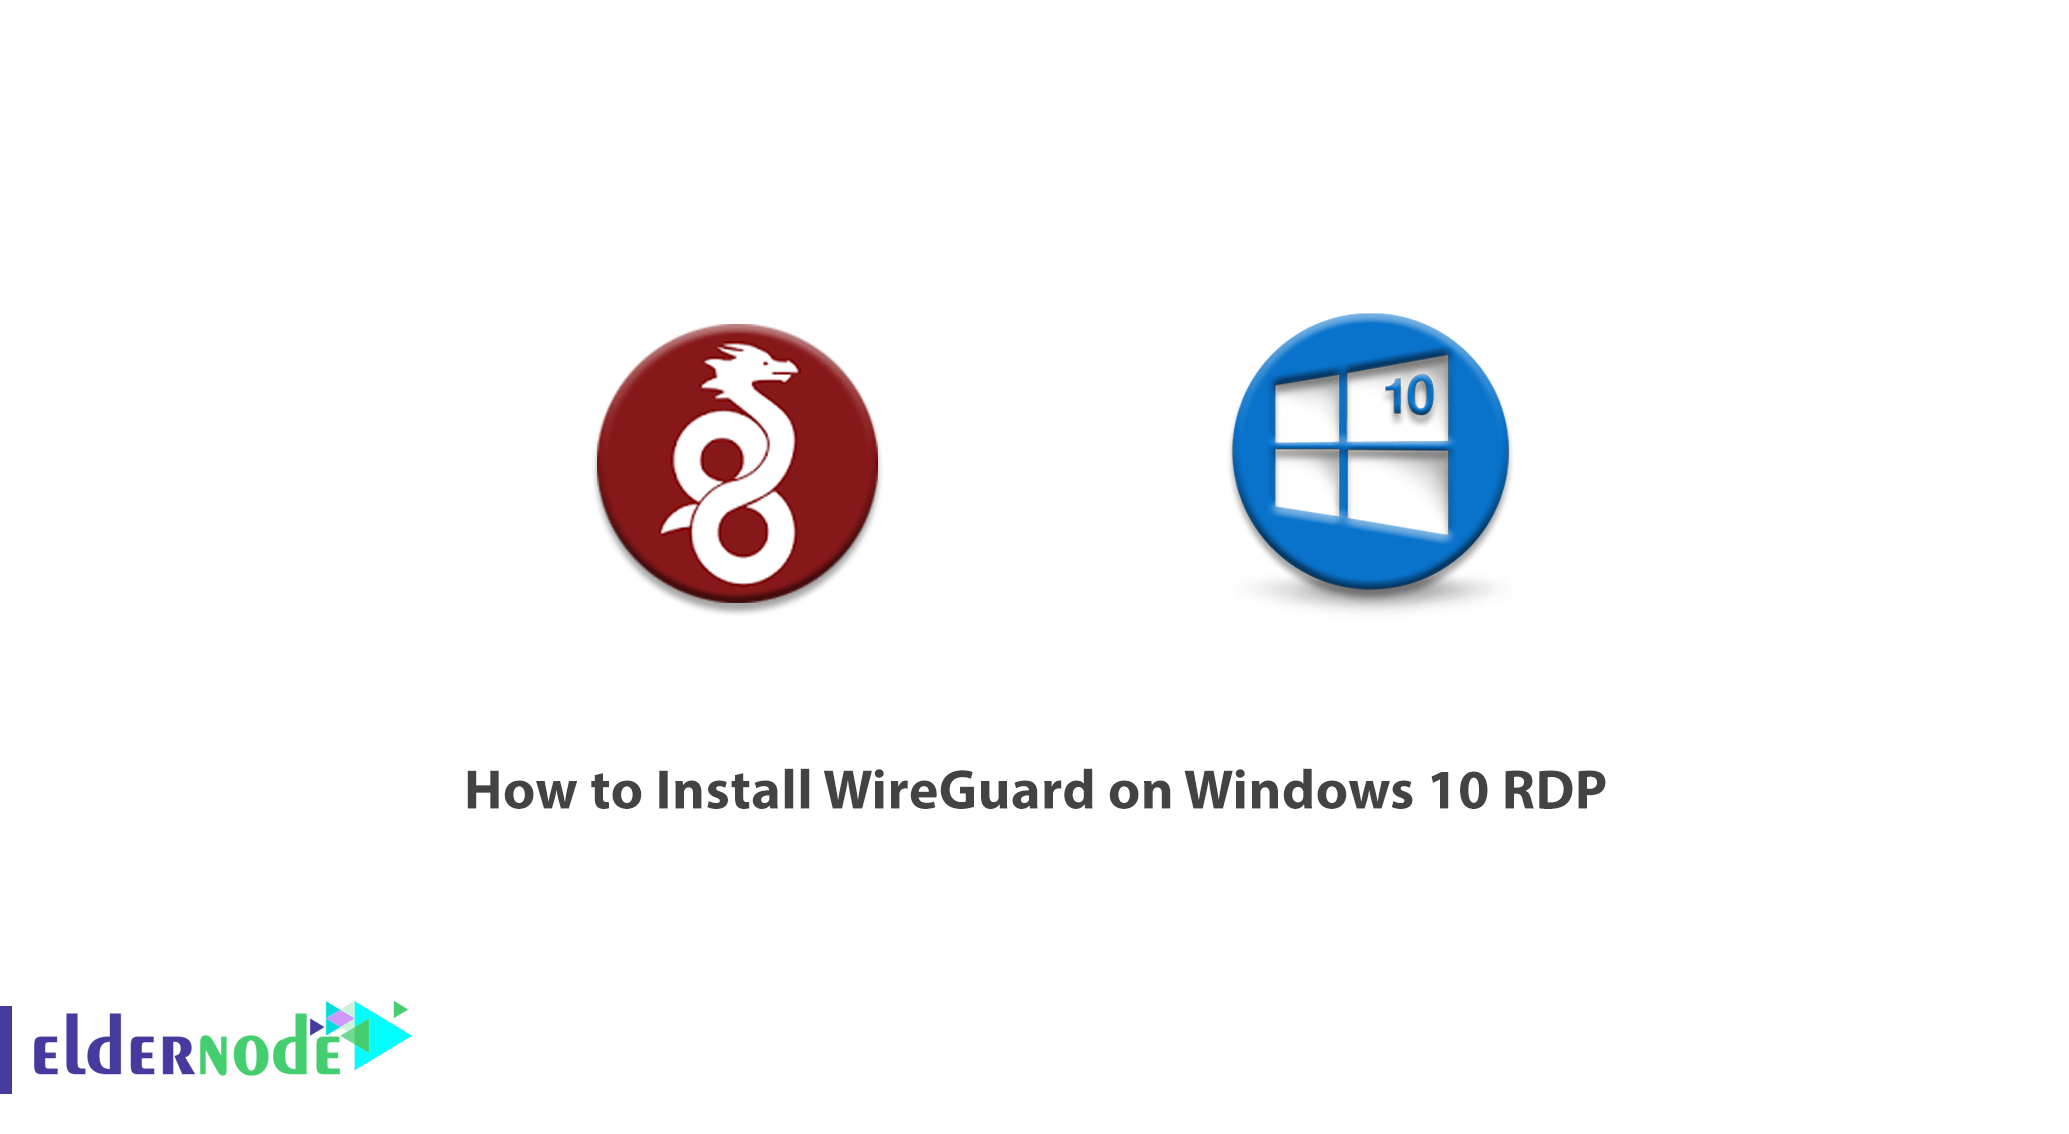 How to Install WireGuard on Windows 10 RDP